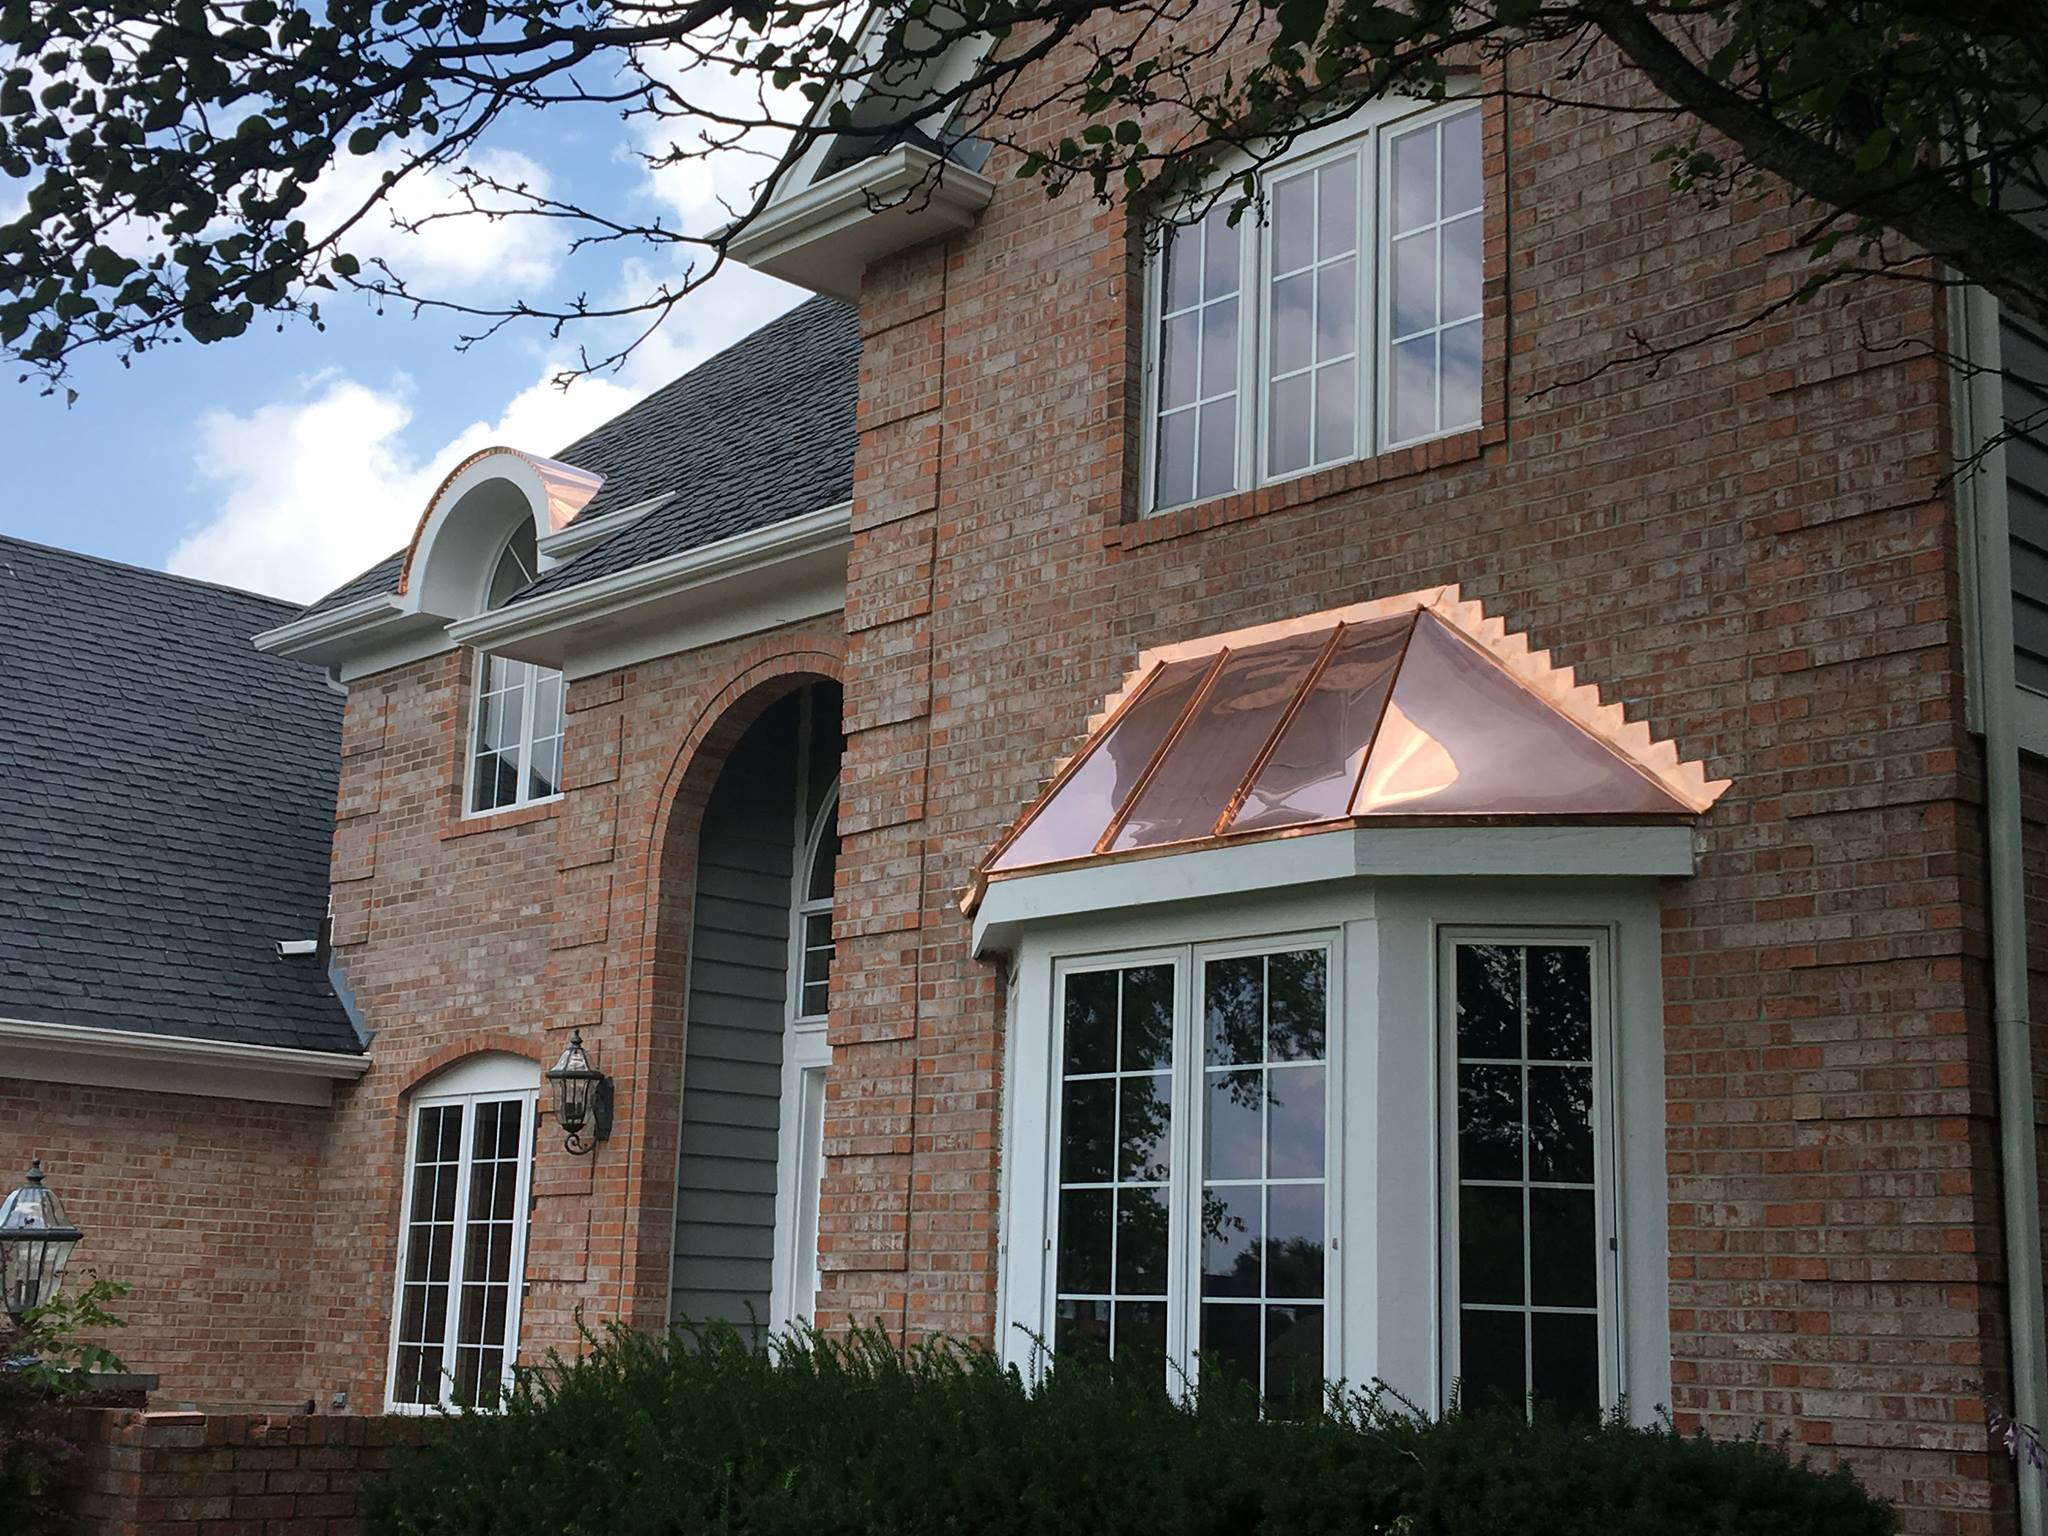 copper window awning and flashing done by optimal copper gutters and roof installers